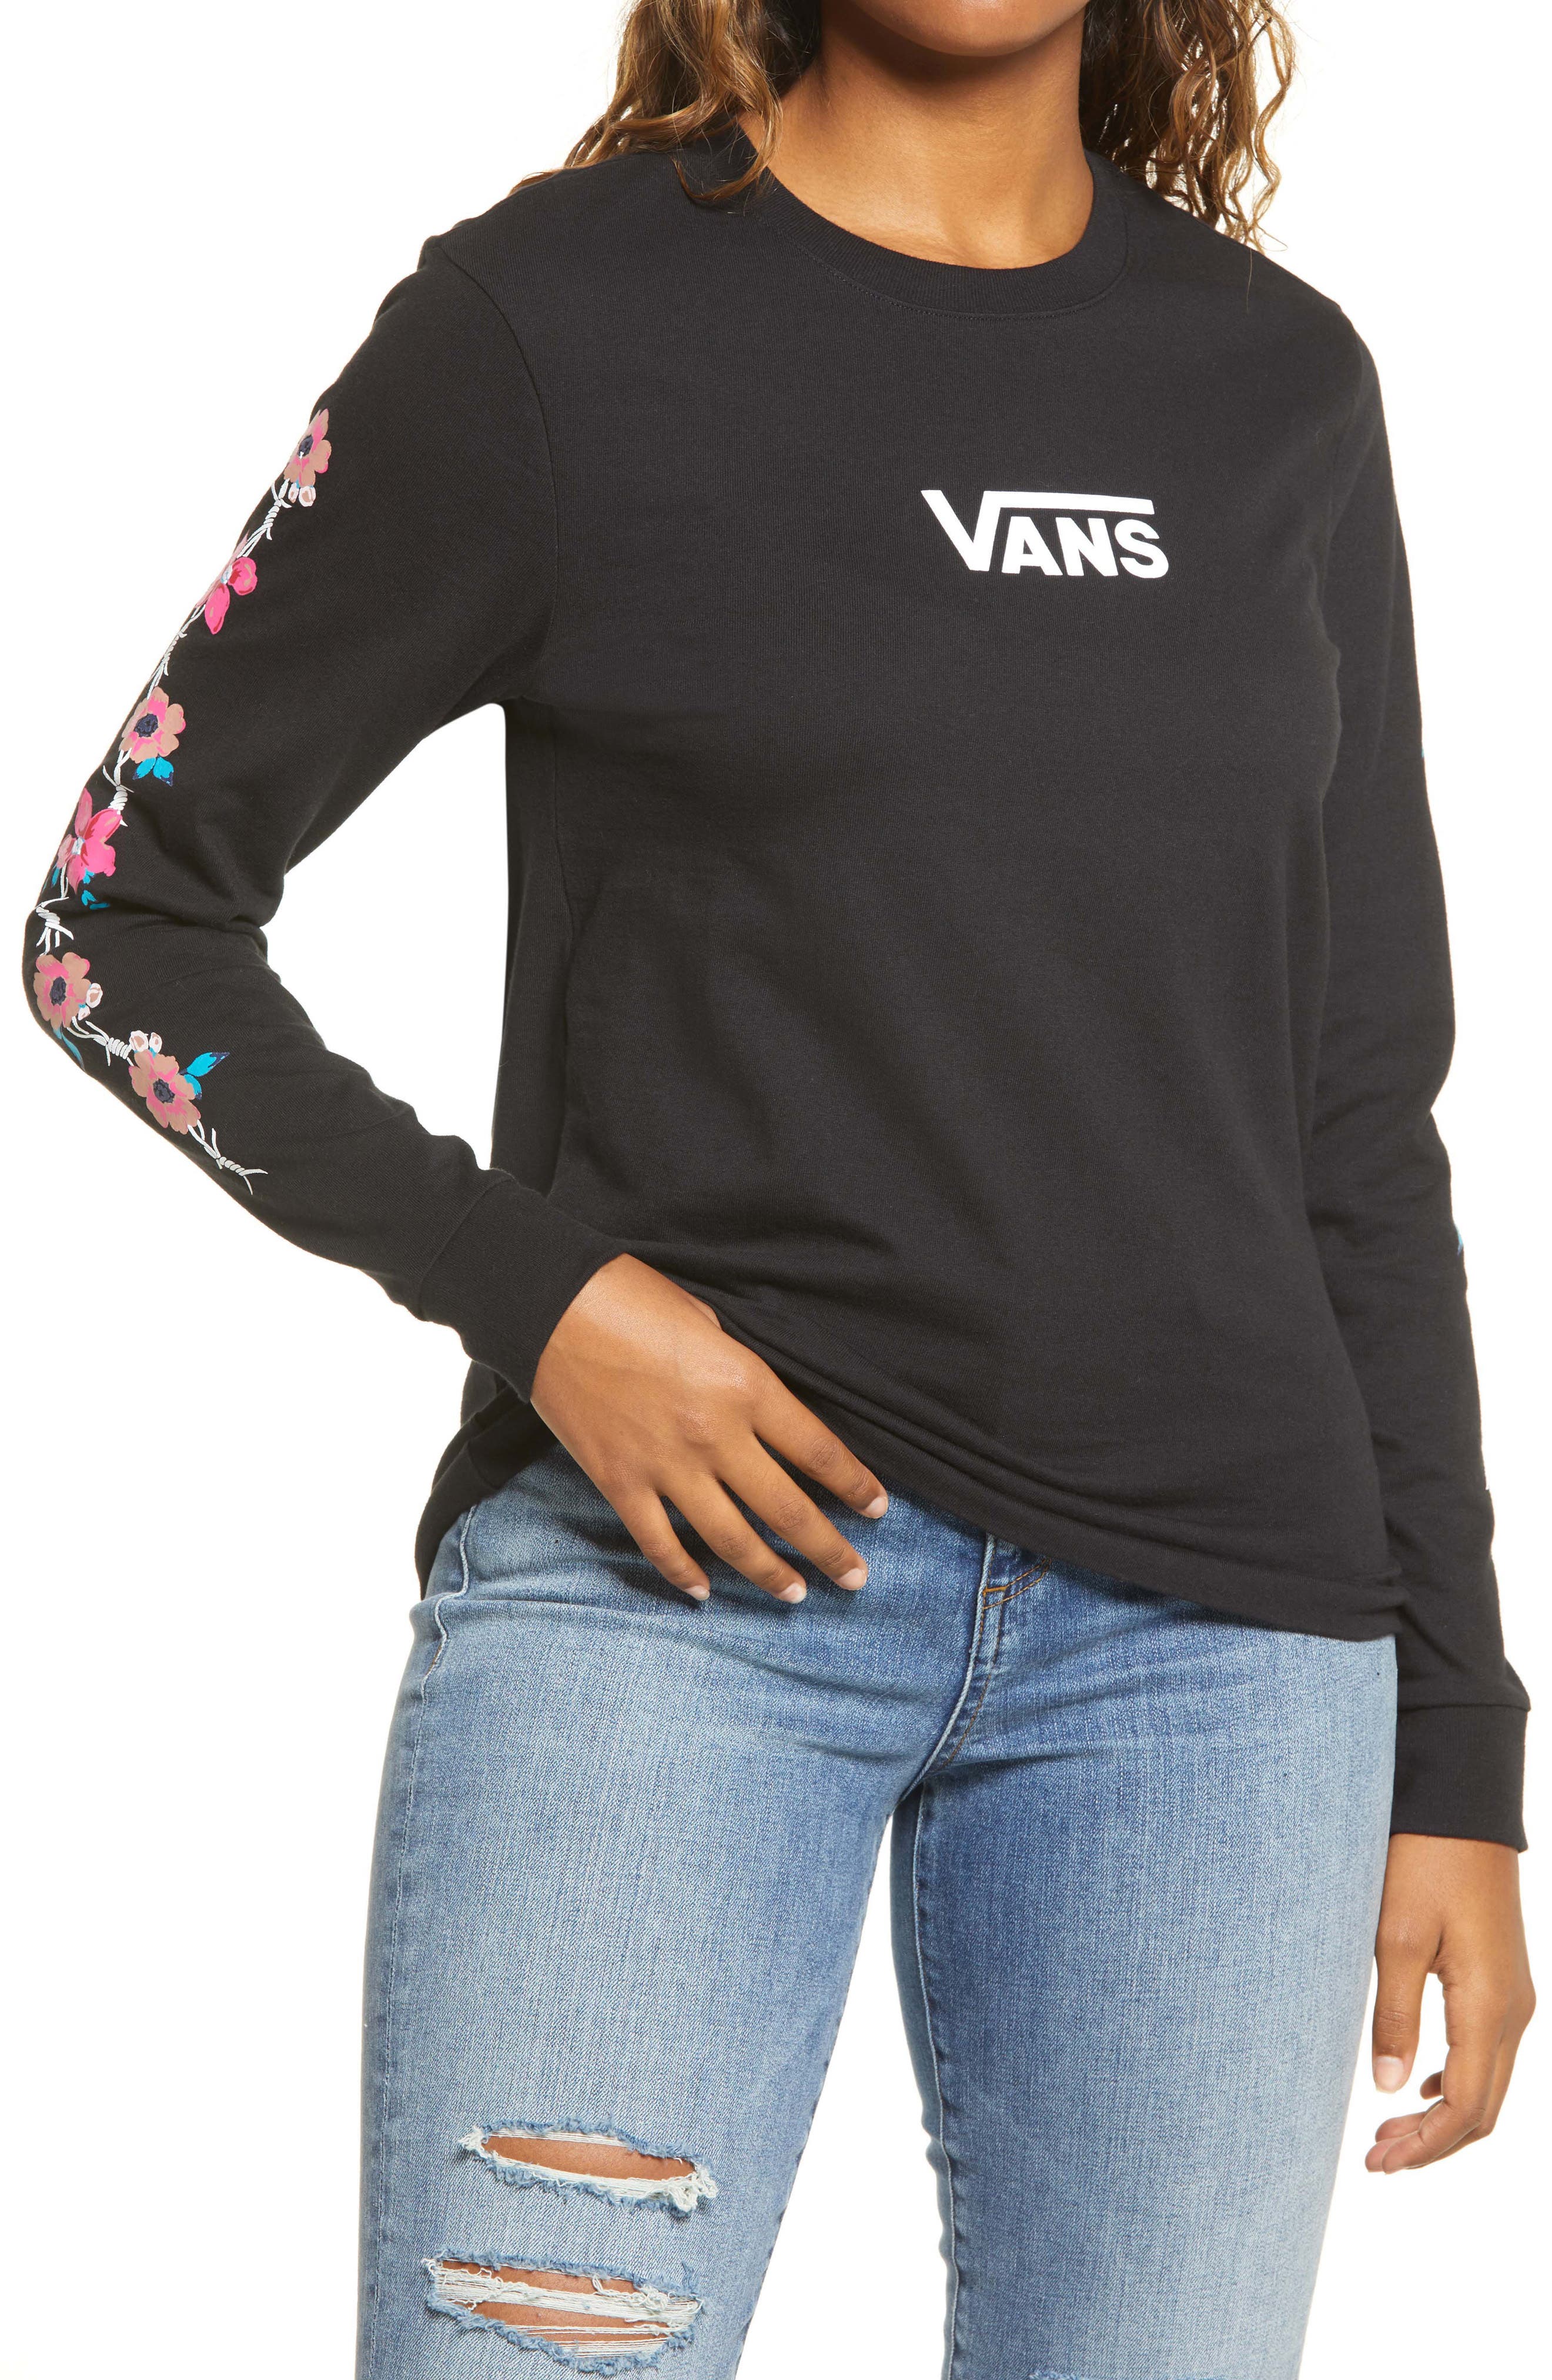 cheap vans clothing for sale